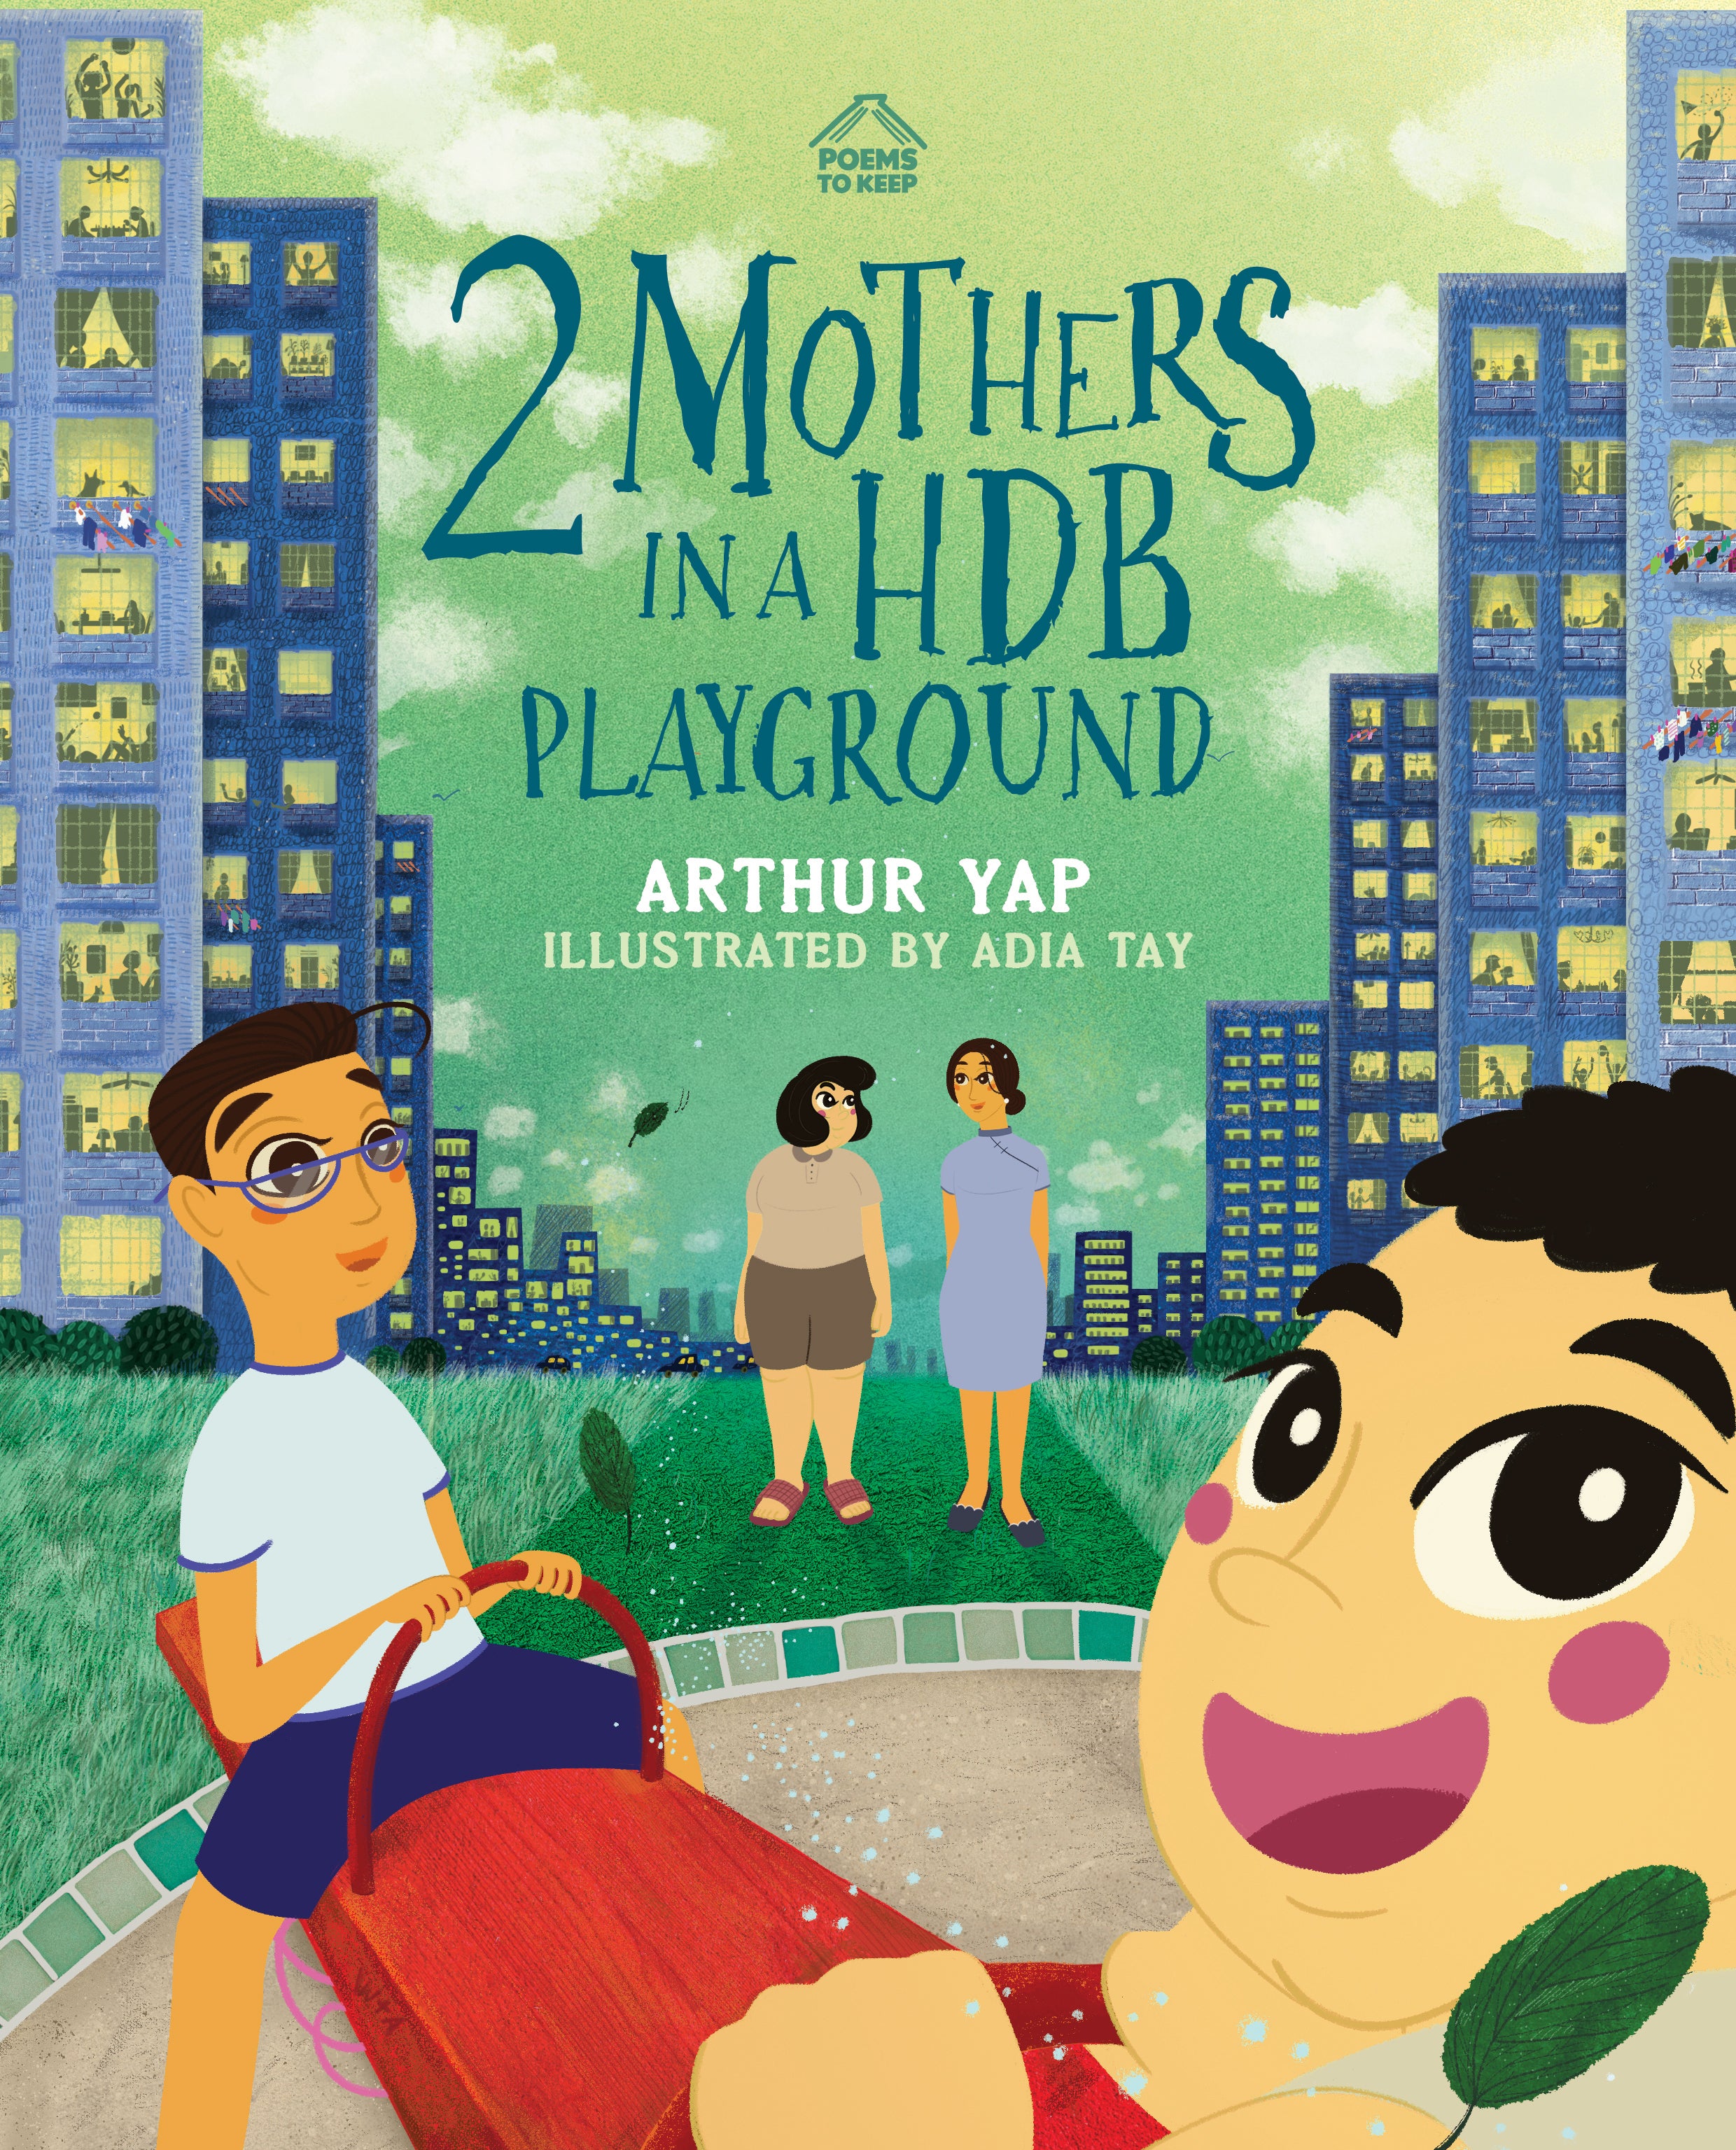 2 Mothers in a HDB Playground